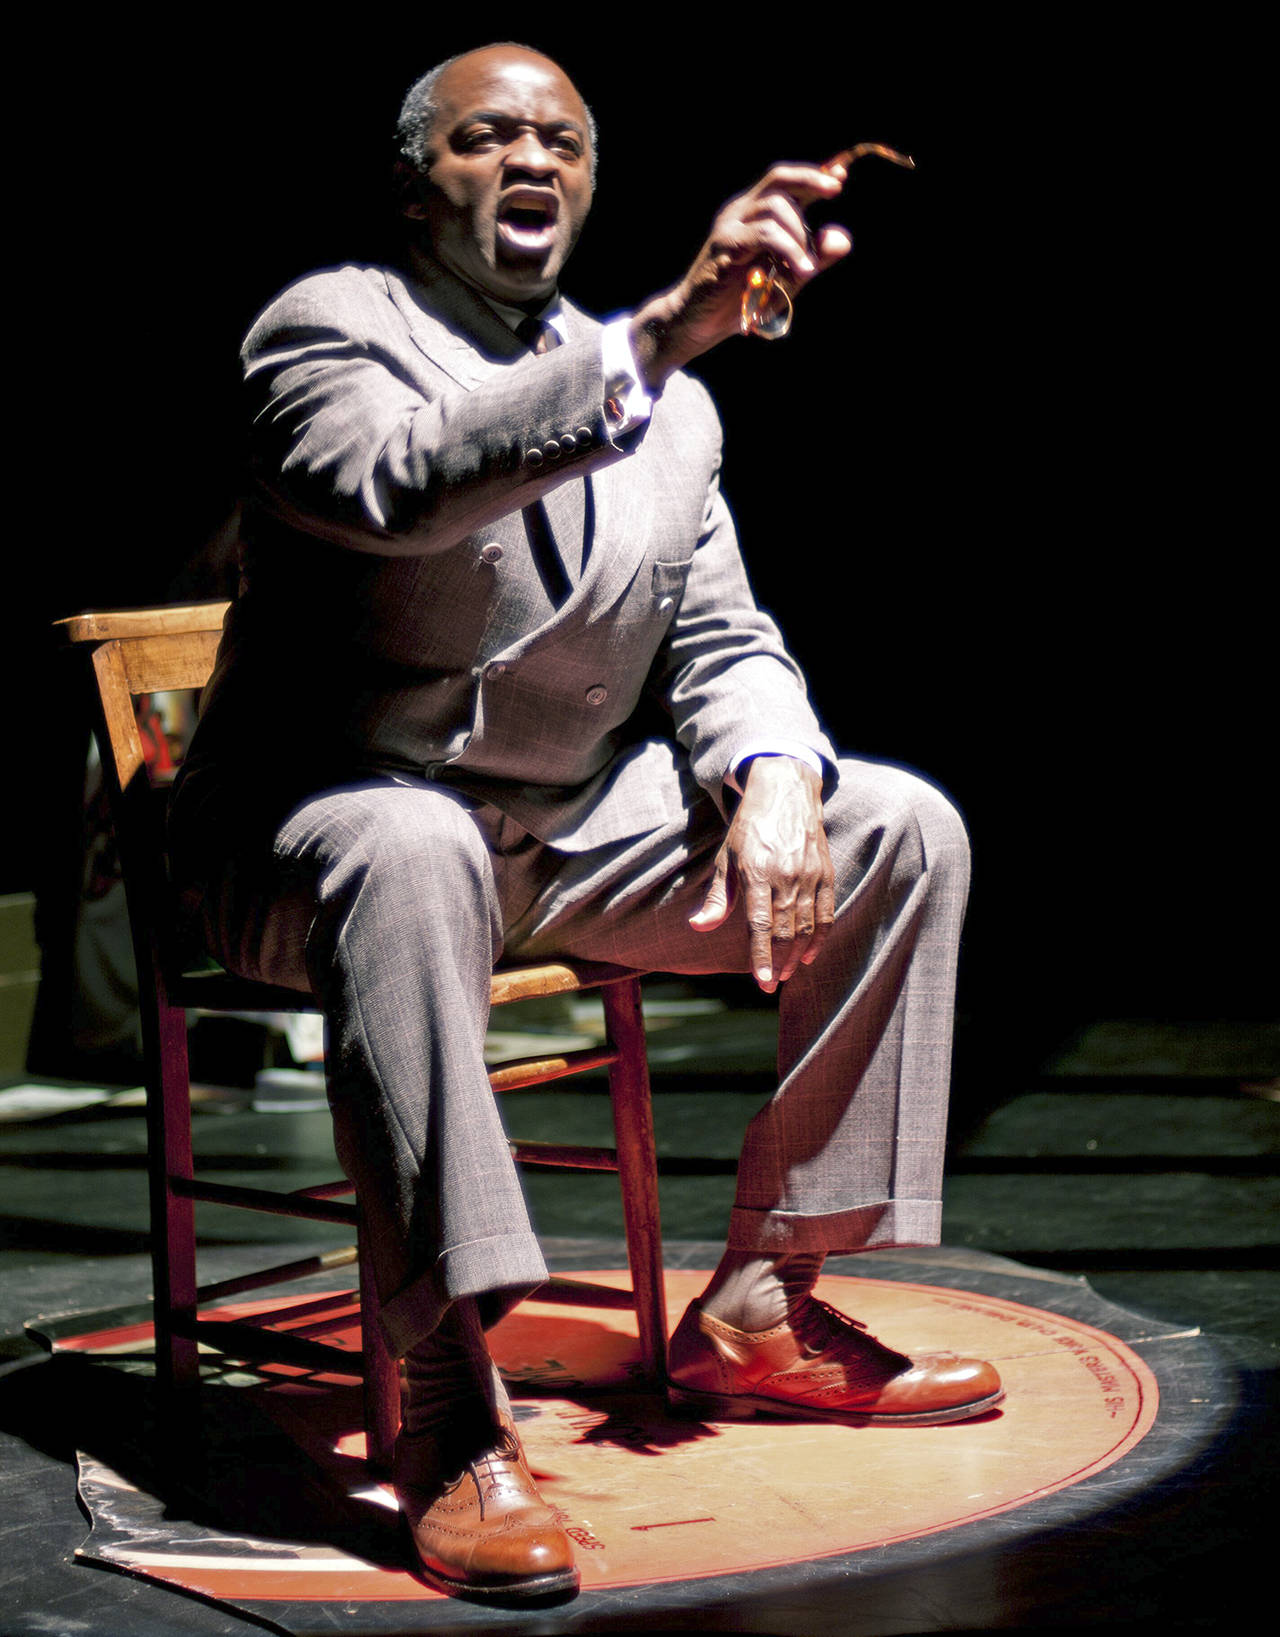 Actor, singer and writer Tayo Aluko will present his one-man show “Call Mr. Robeson” Saturday night at the Bishop Center. (Courtesy photo)